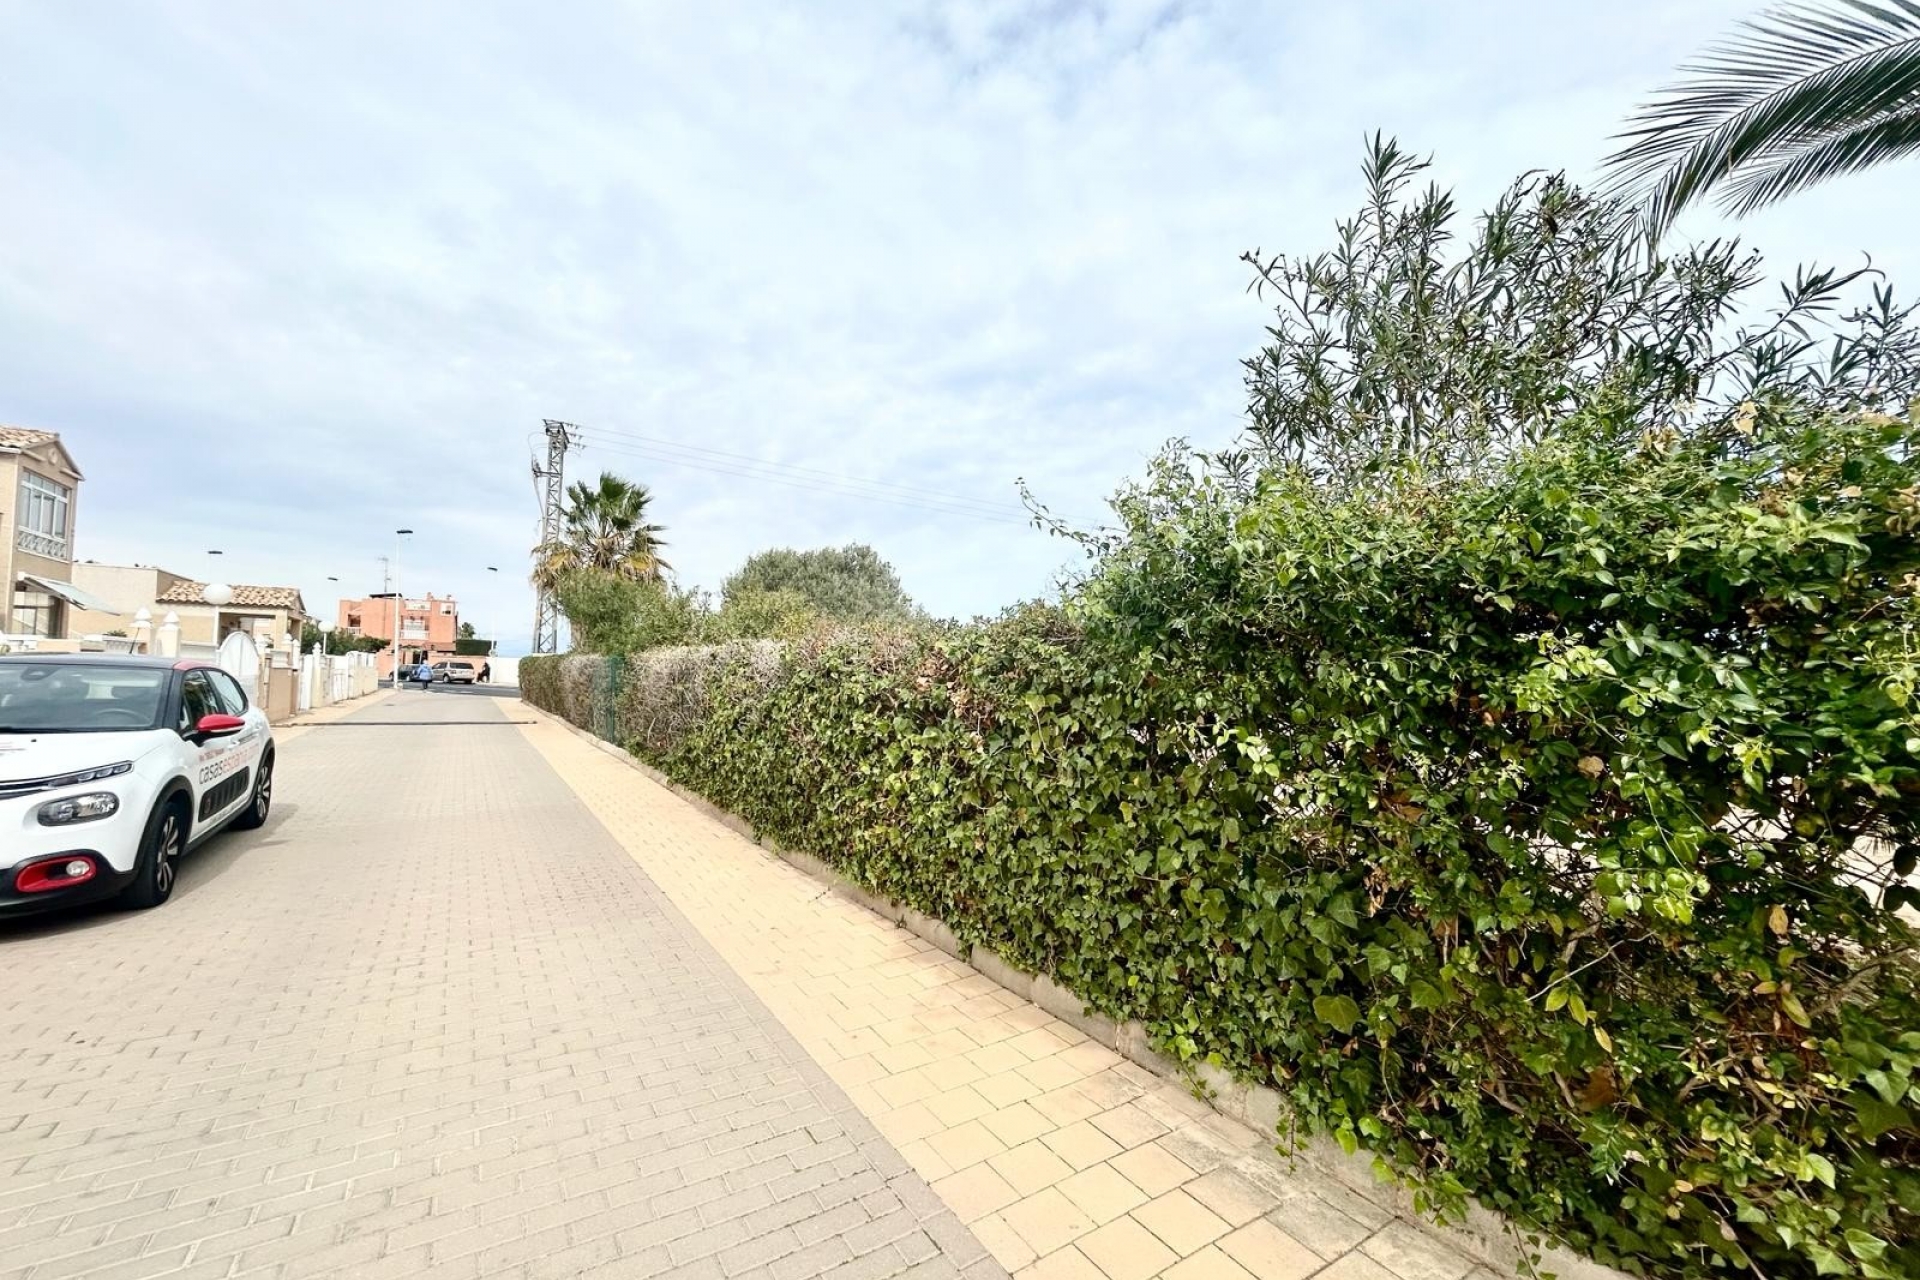 Property Sold - Bungalow for sale - Torrevieja - Banos de Europa